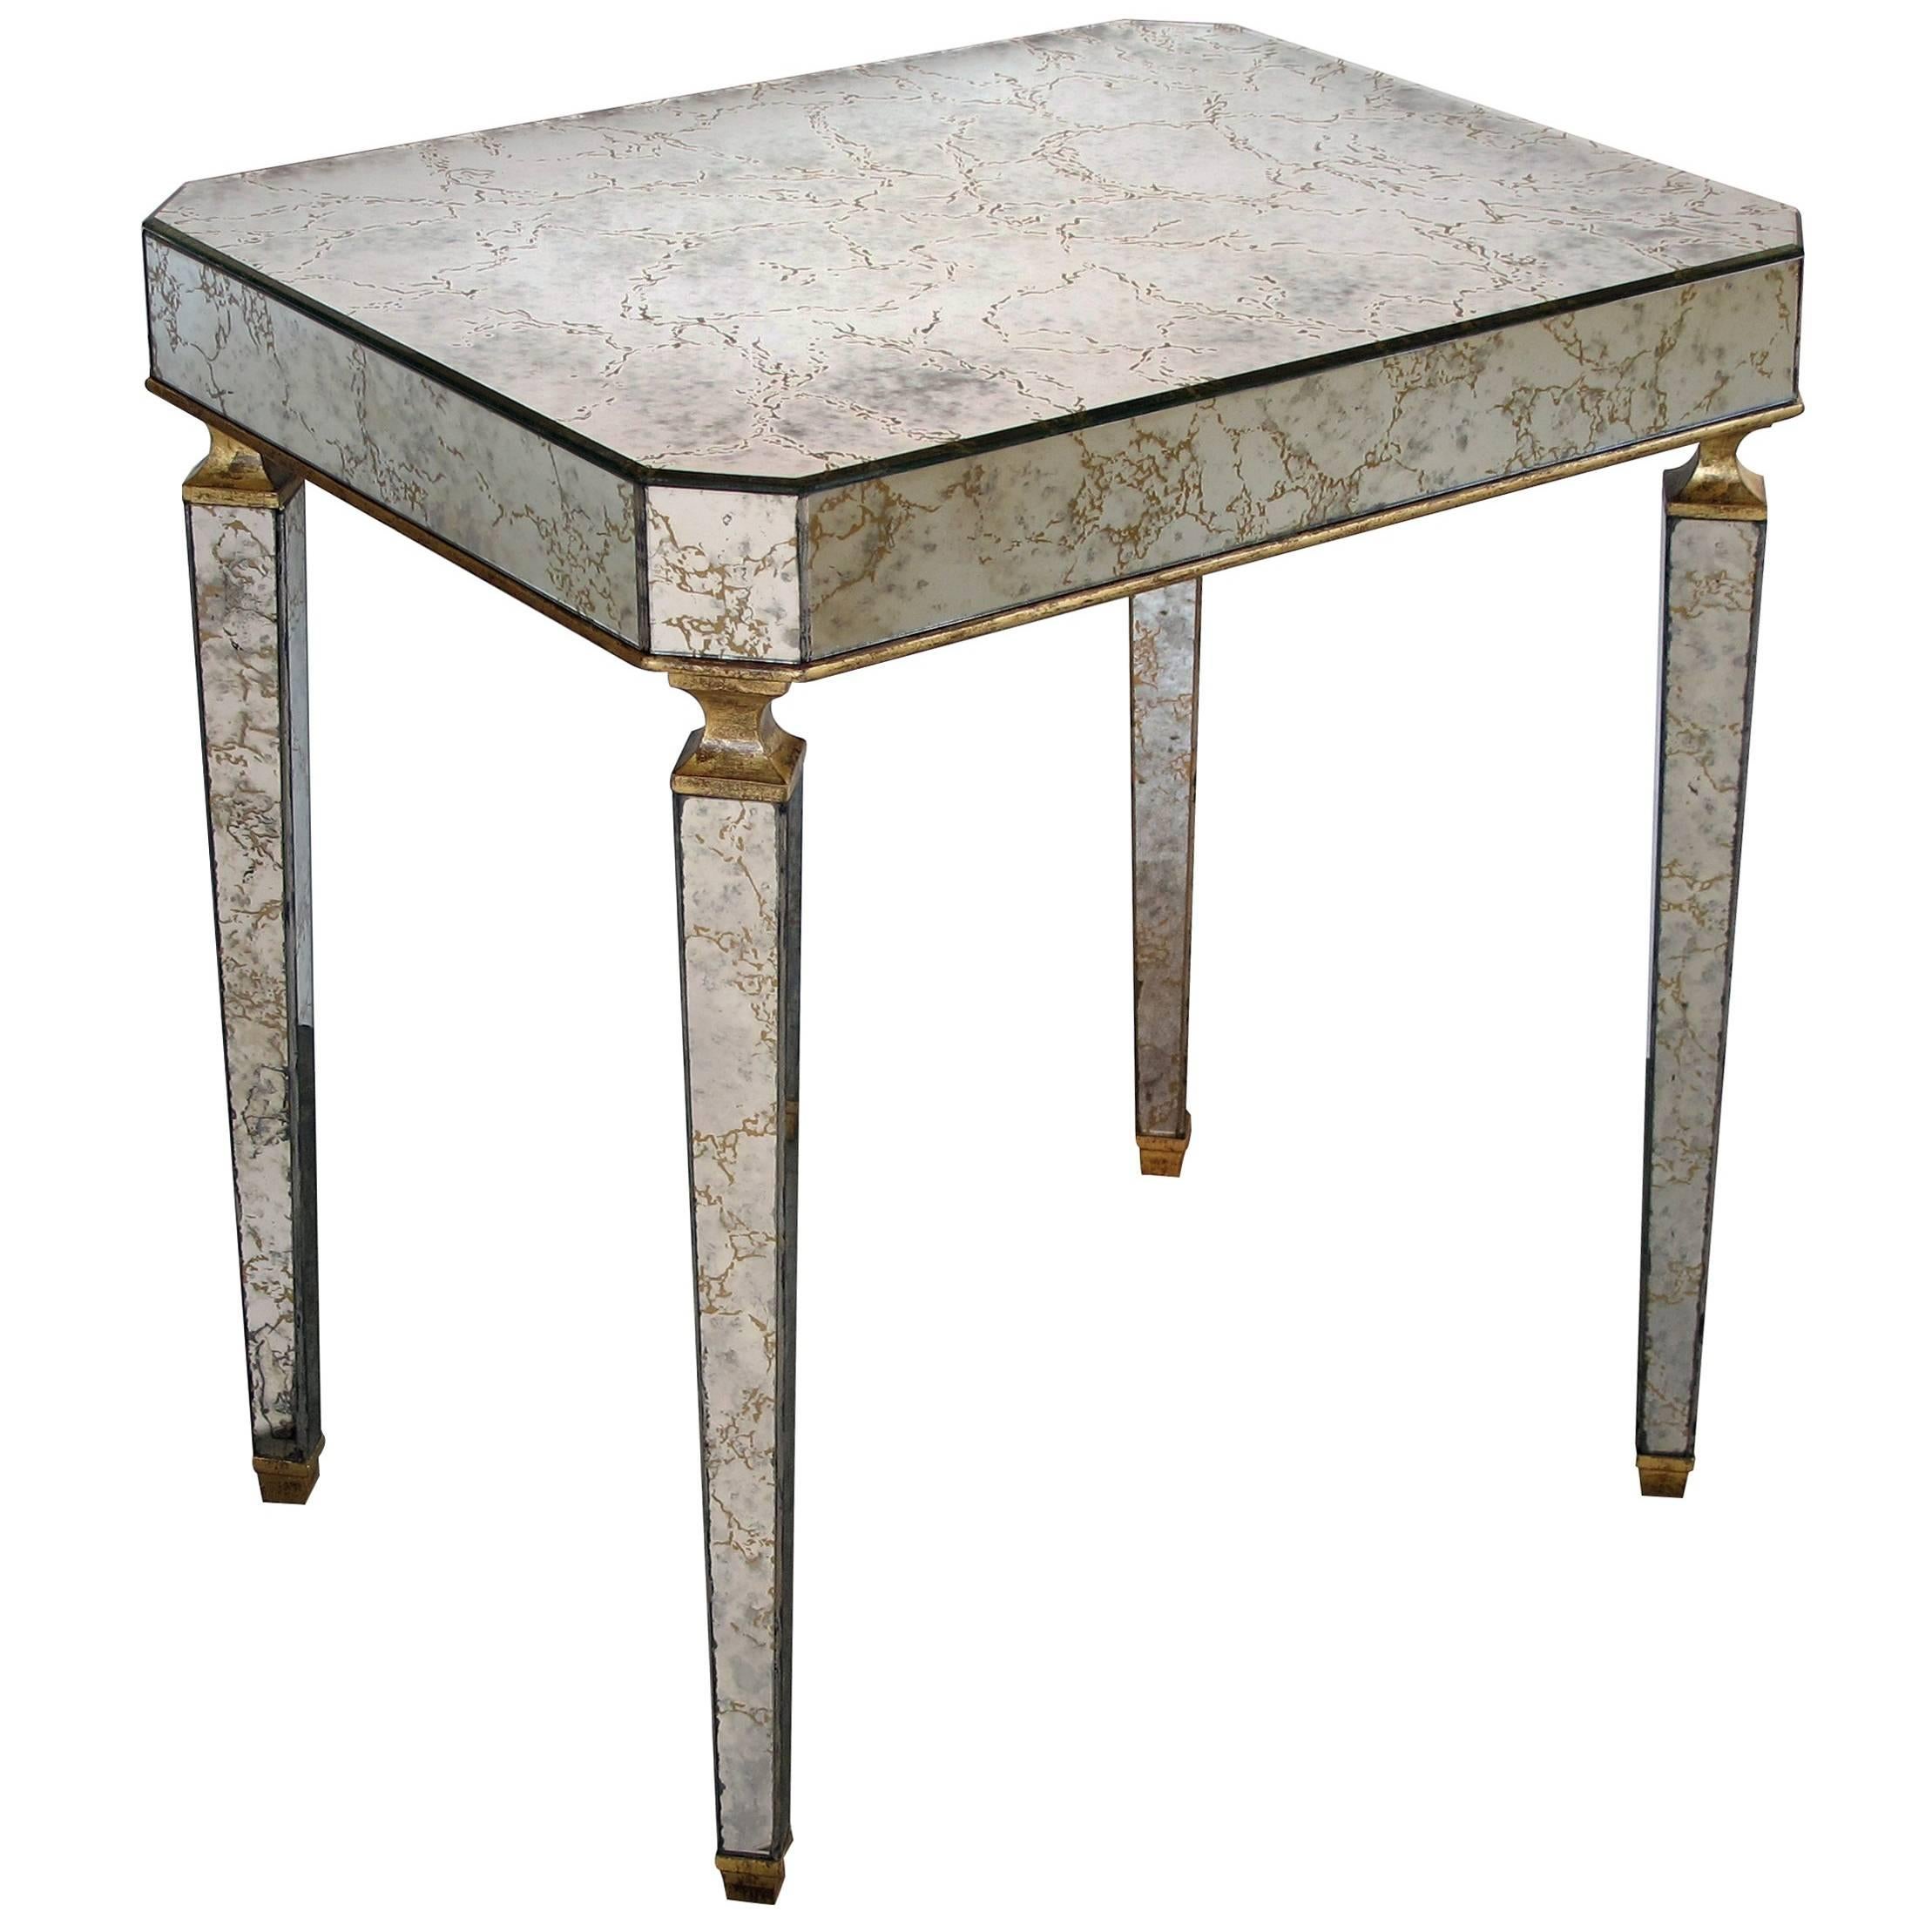 Stylish American Mid-Century Rectangular Mirrored Side Table by Archibald Taylor For Sale